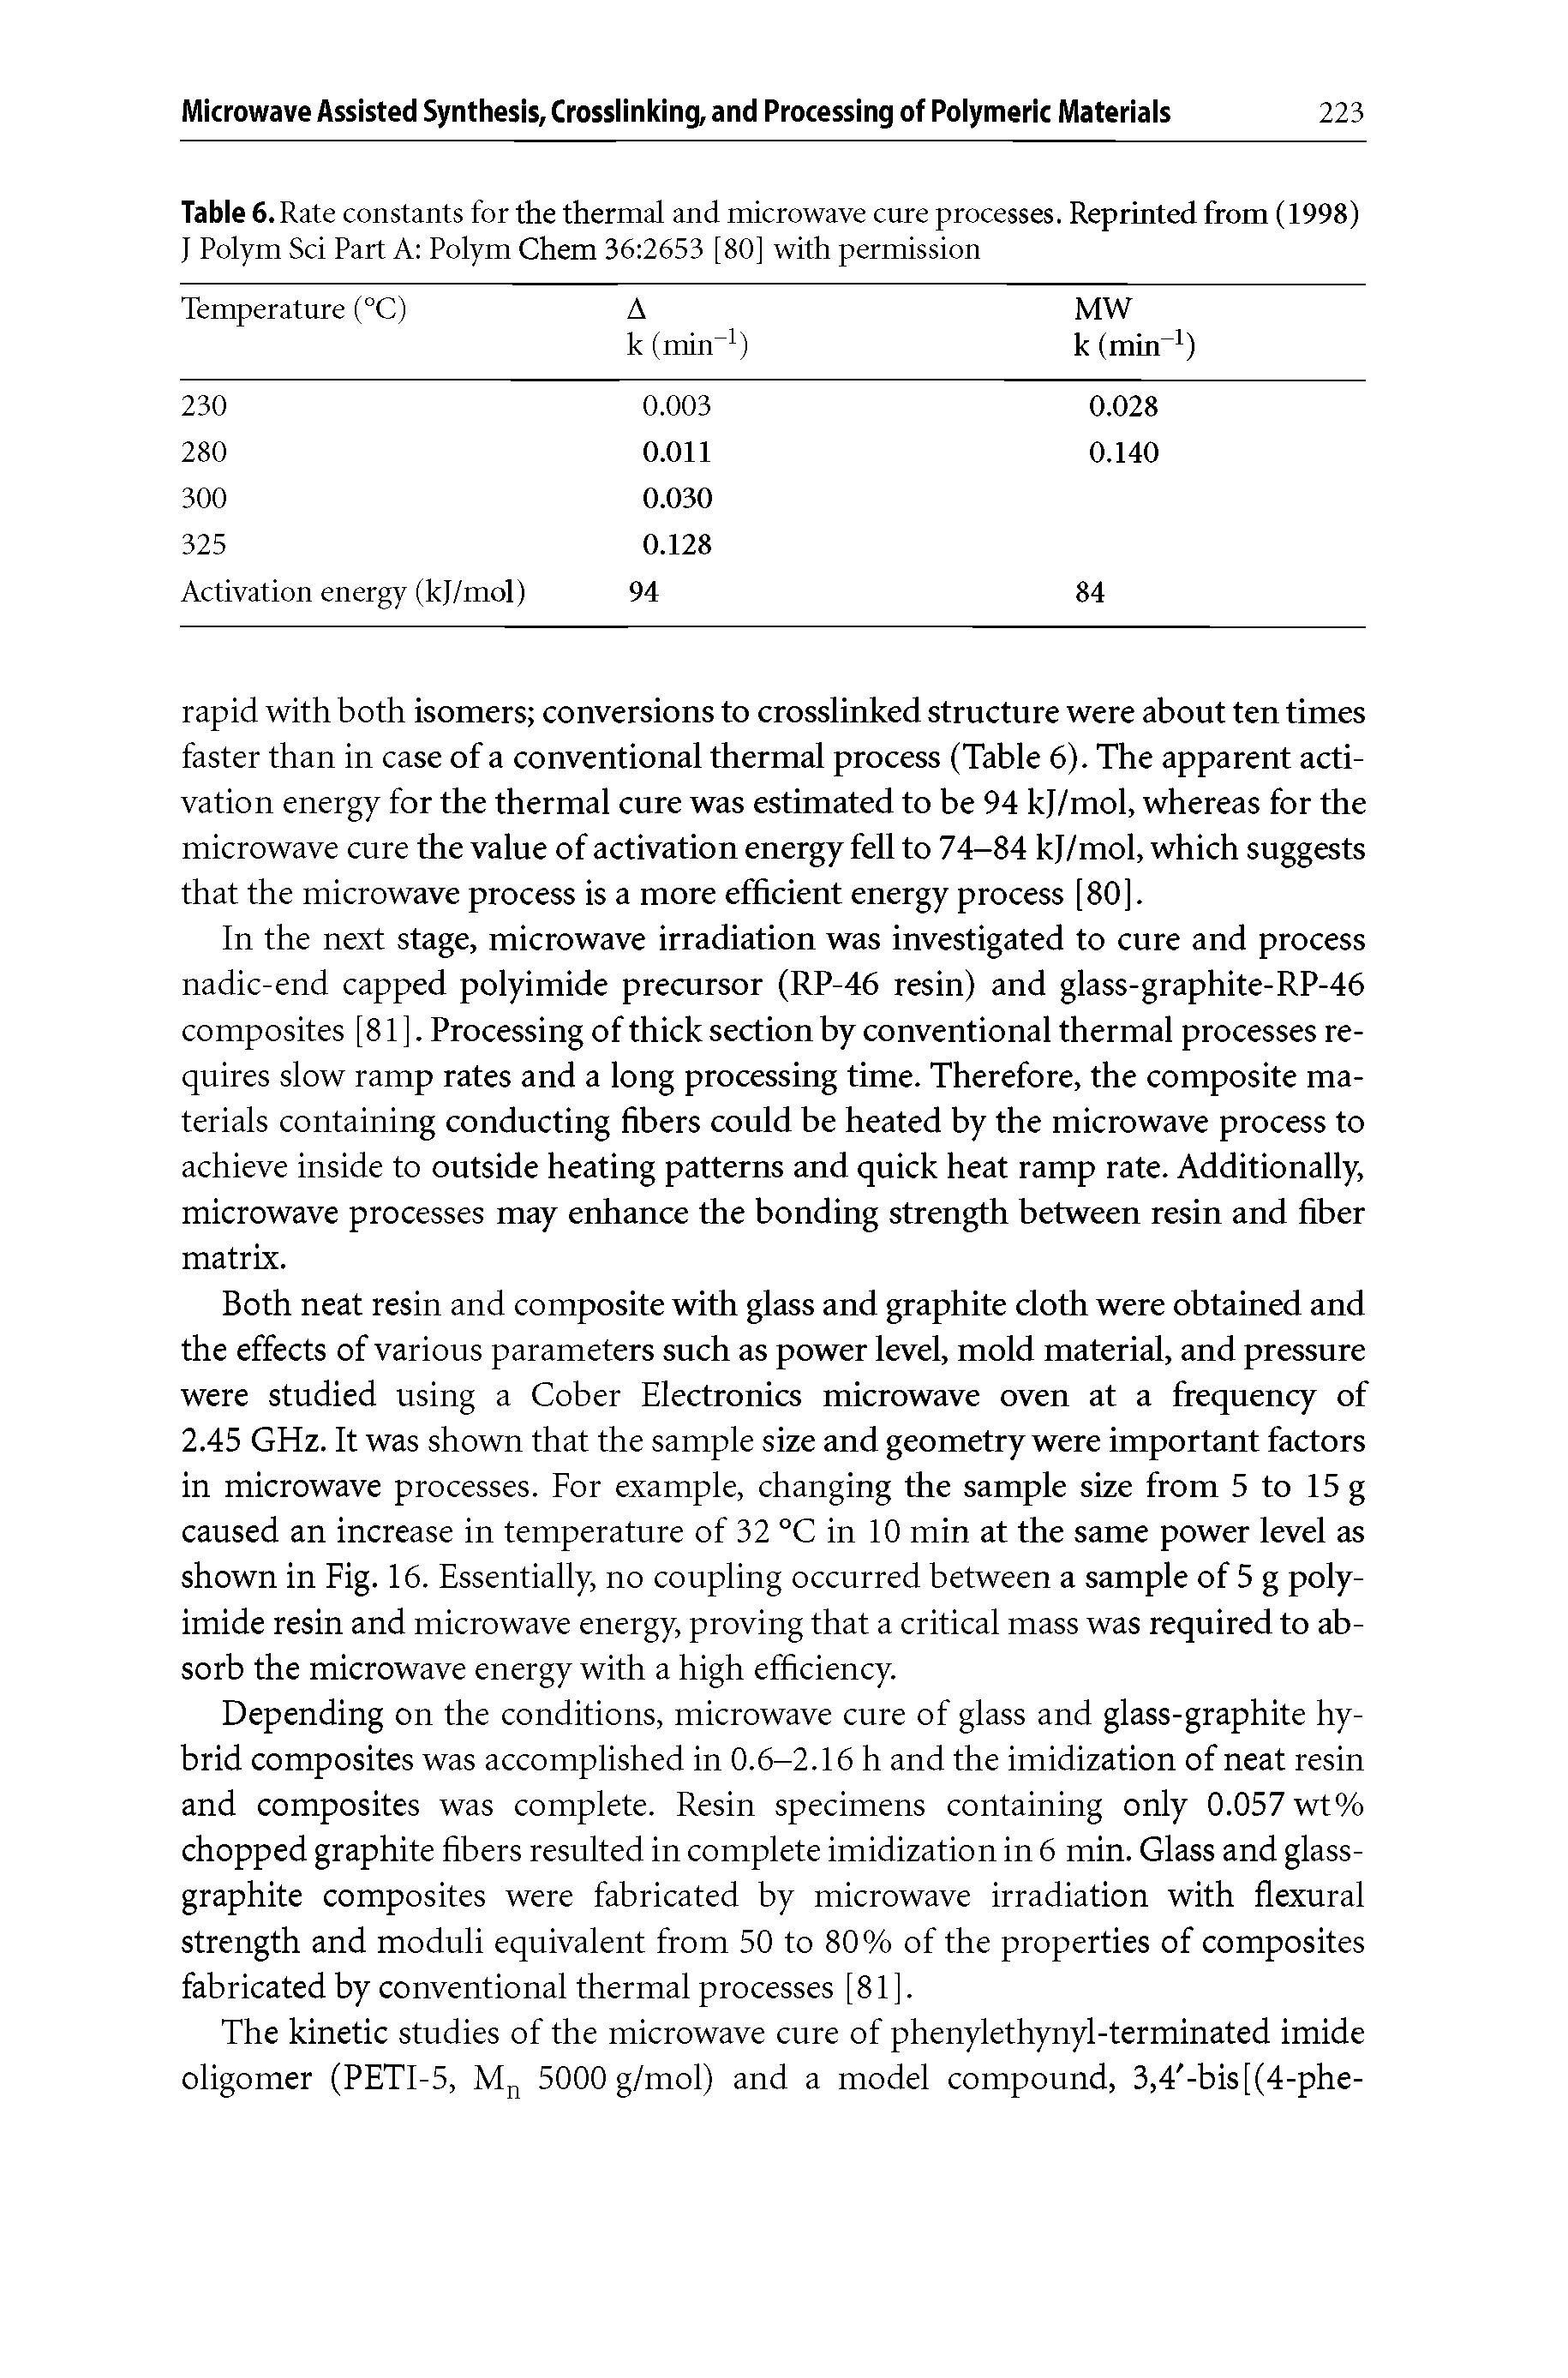 Table 6. Rate constants for the thermal and microwave cure processes. Reprinted from (1998) J Polym Sci Part A Polym Chem 36 2653 [80] with permission ...